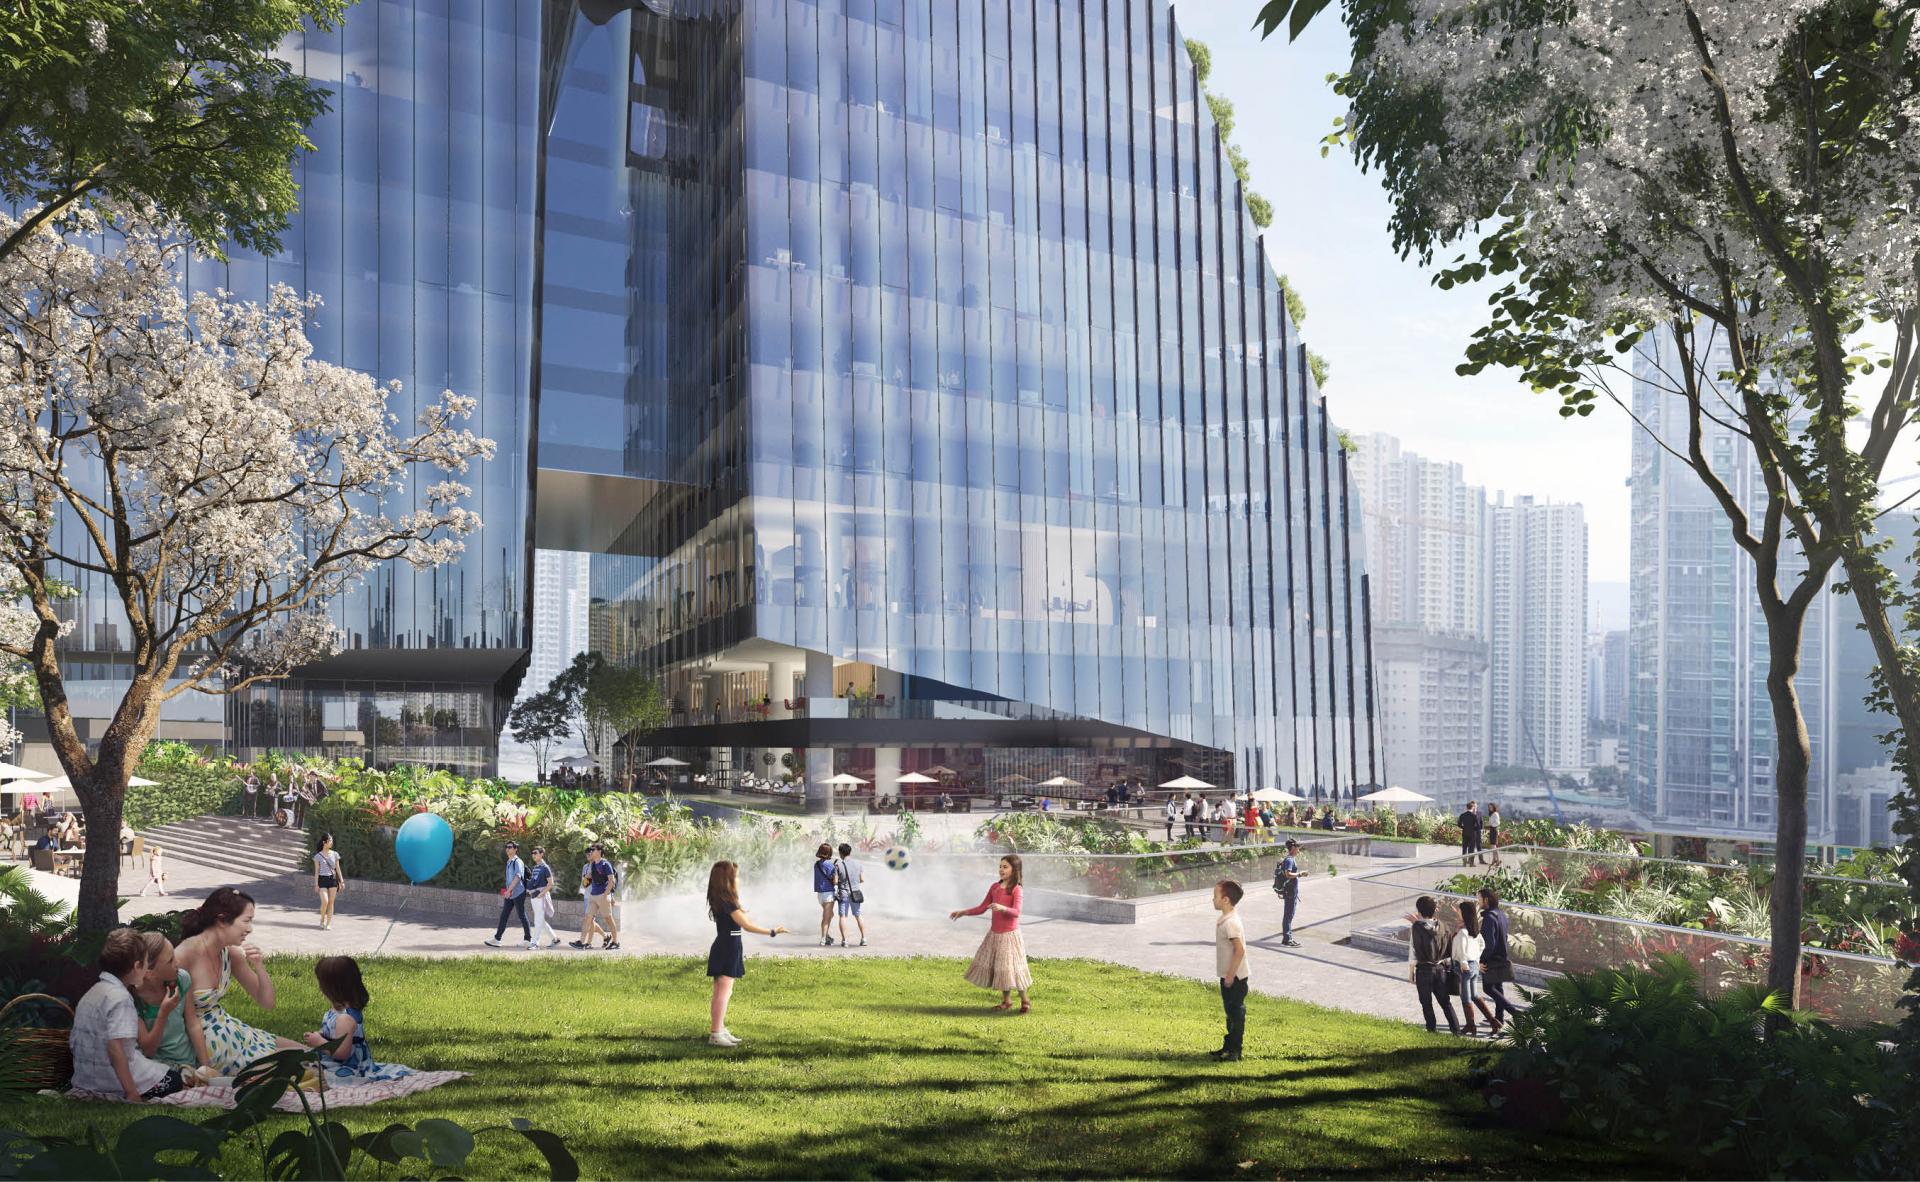 A Former Airport Site is Transformed into a Smart Development in Hong Kong